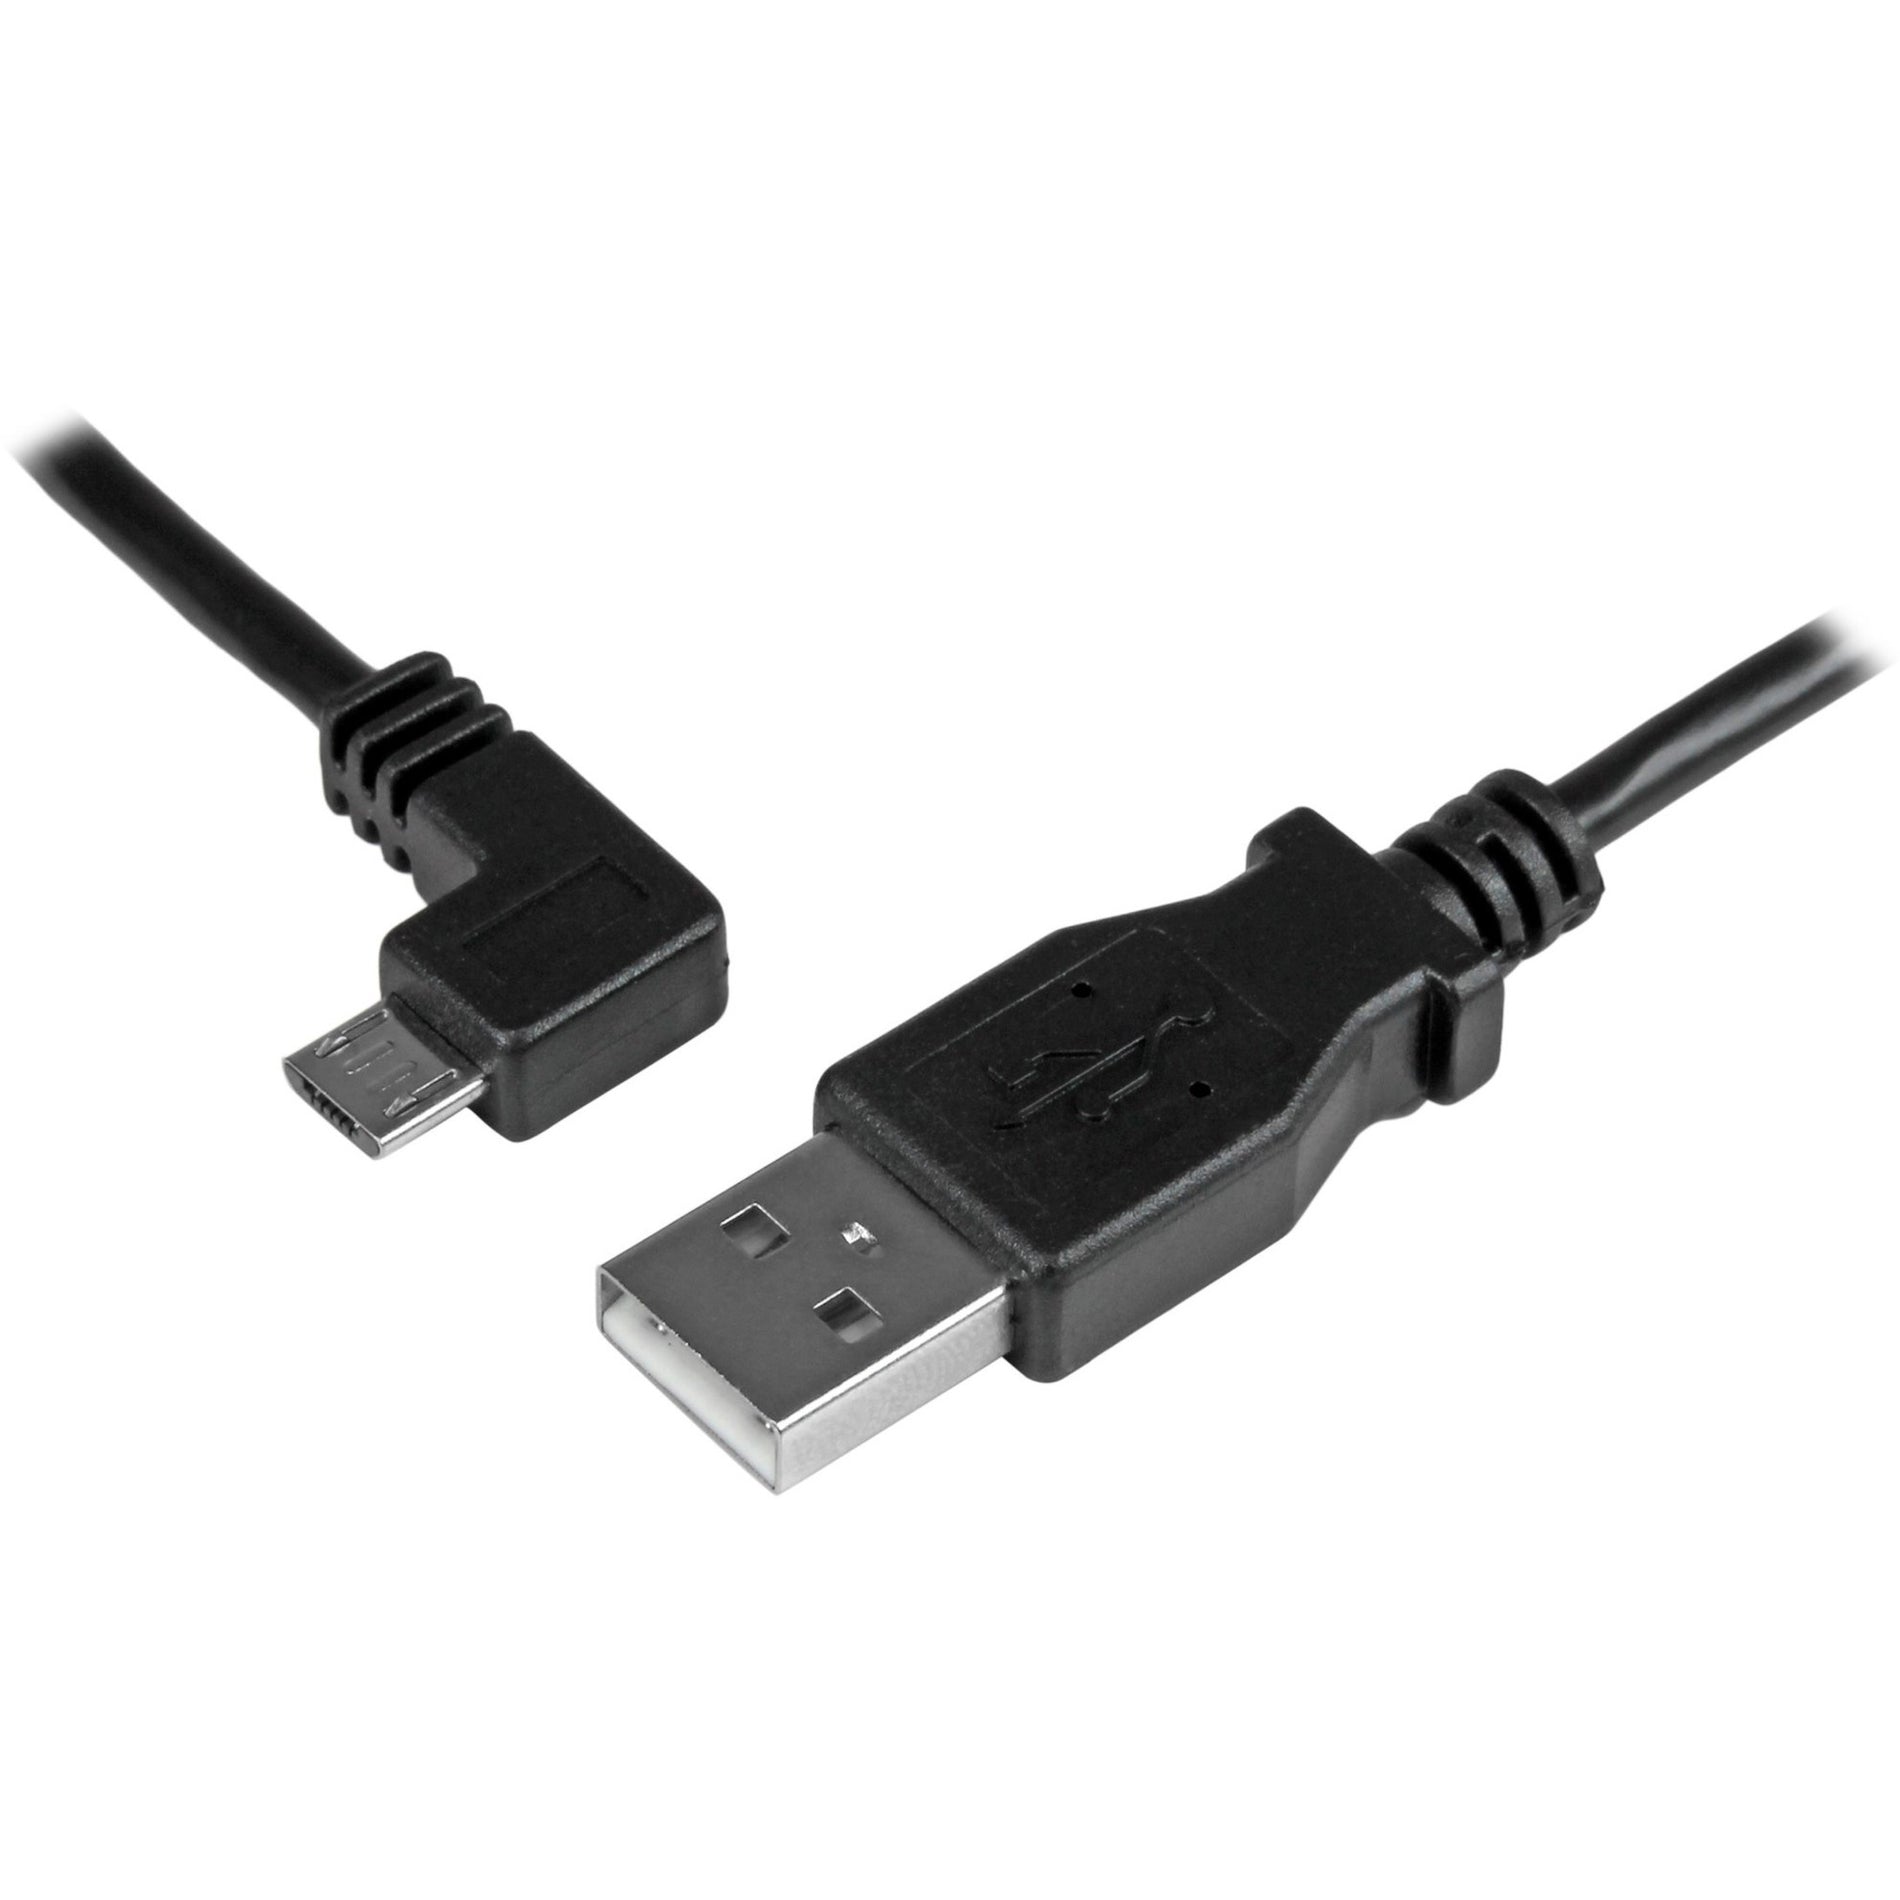 StarTech.com USBAUB2MLA Micro-USB Charge-and-Sync Cable M/M - Left-Angle Micro-USB - 2m (6 ft.), Charging and Data Transfer, 24 AWG